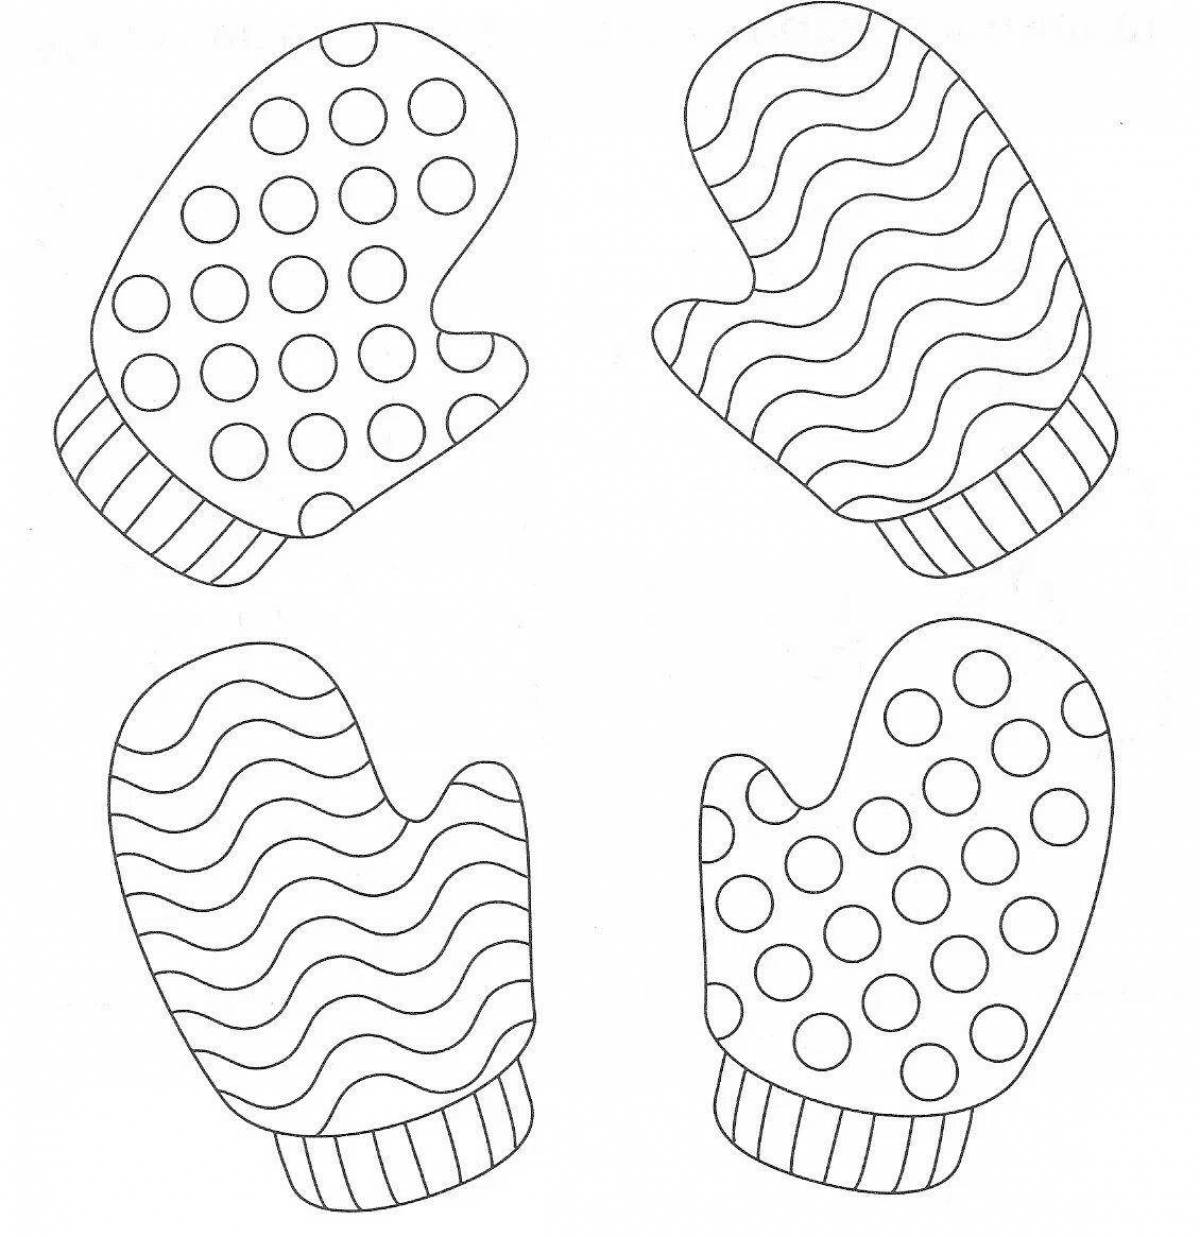 Bright patterns of mittens coloring book for children